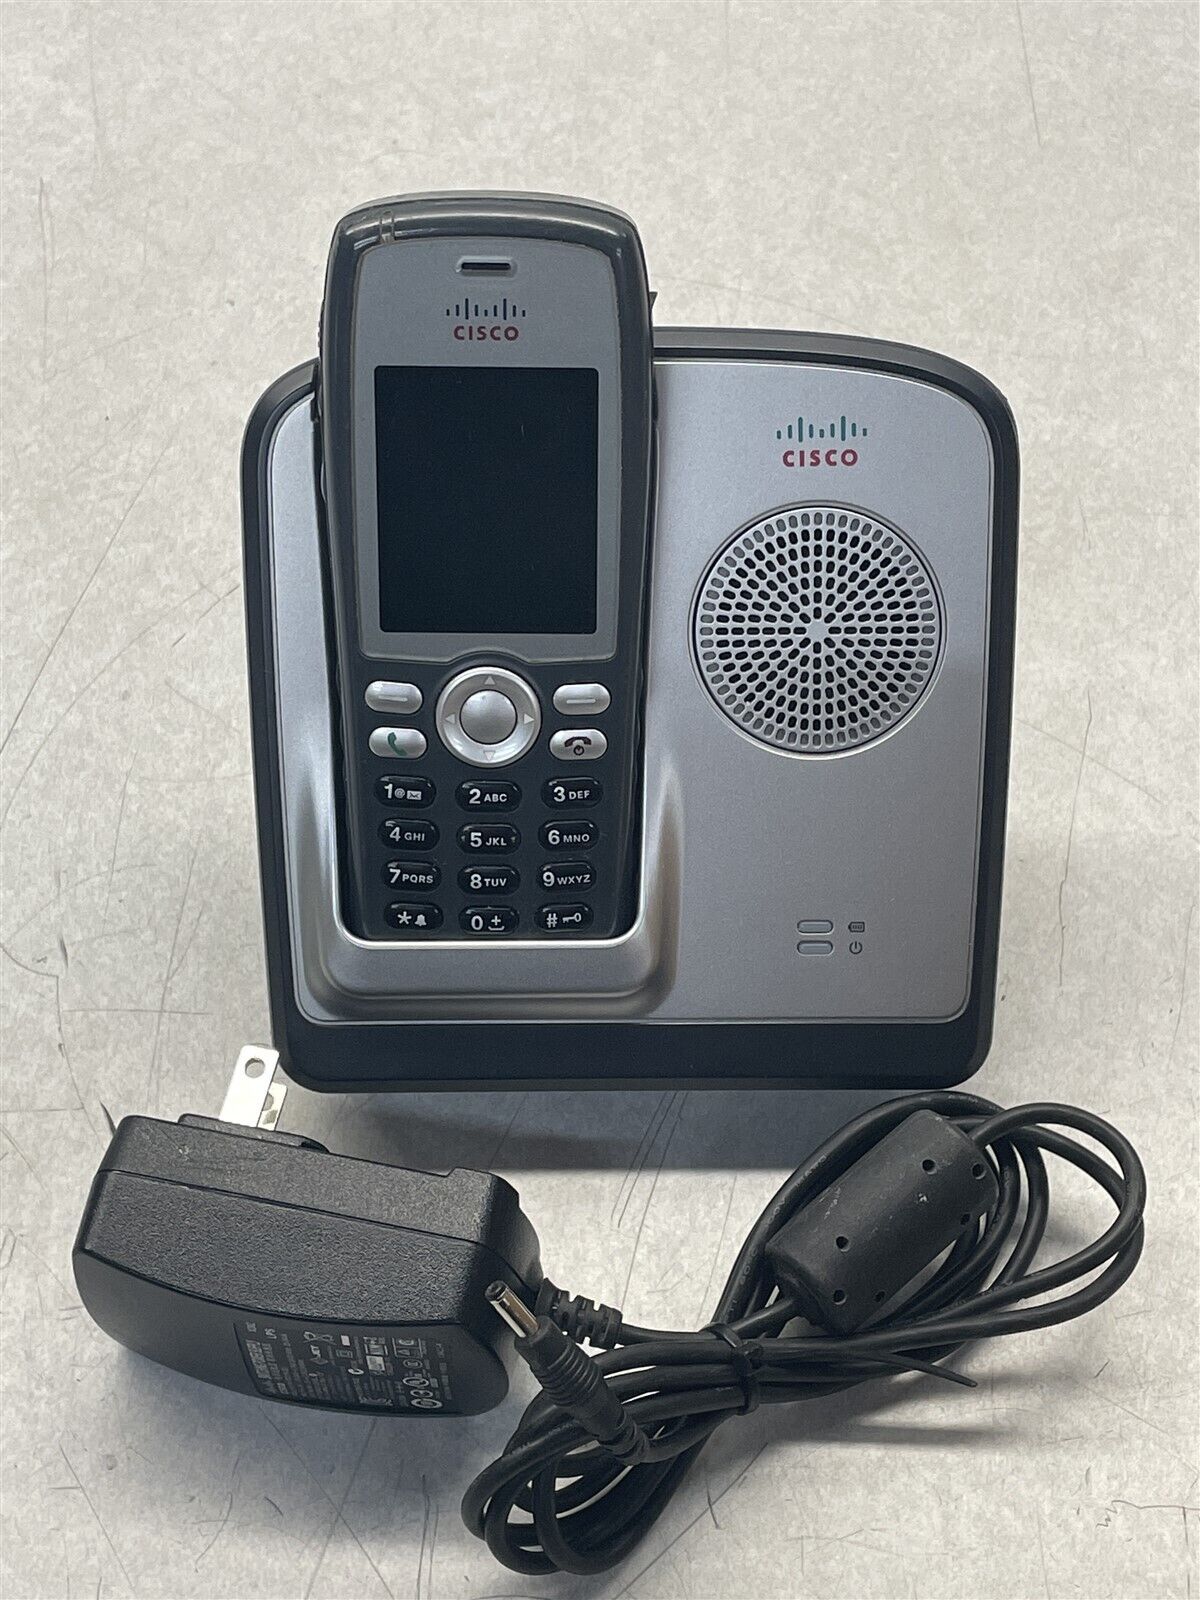 CISCO CP-7925G UC PHONE CP VoIP WIRELESS PHONE W/ BATTERY, CHARGER & POWER CORD